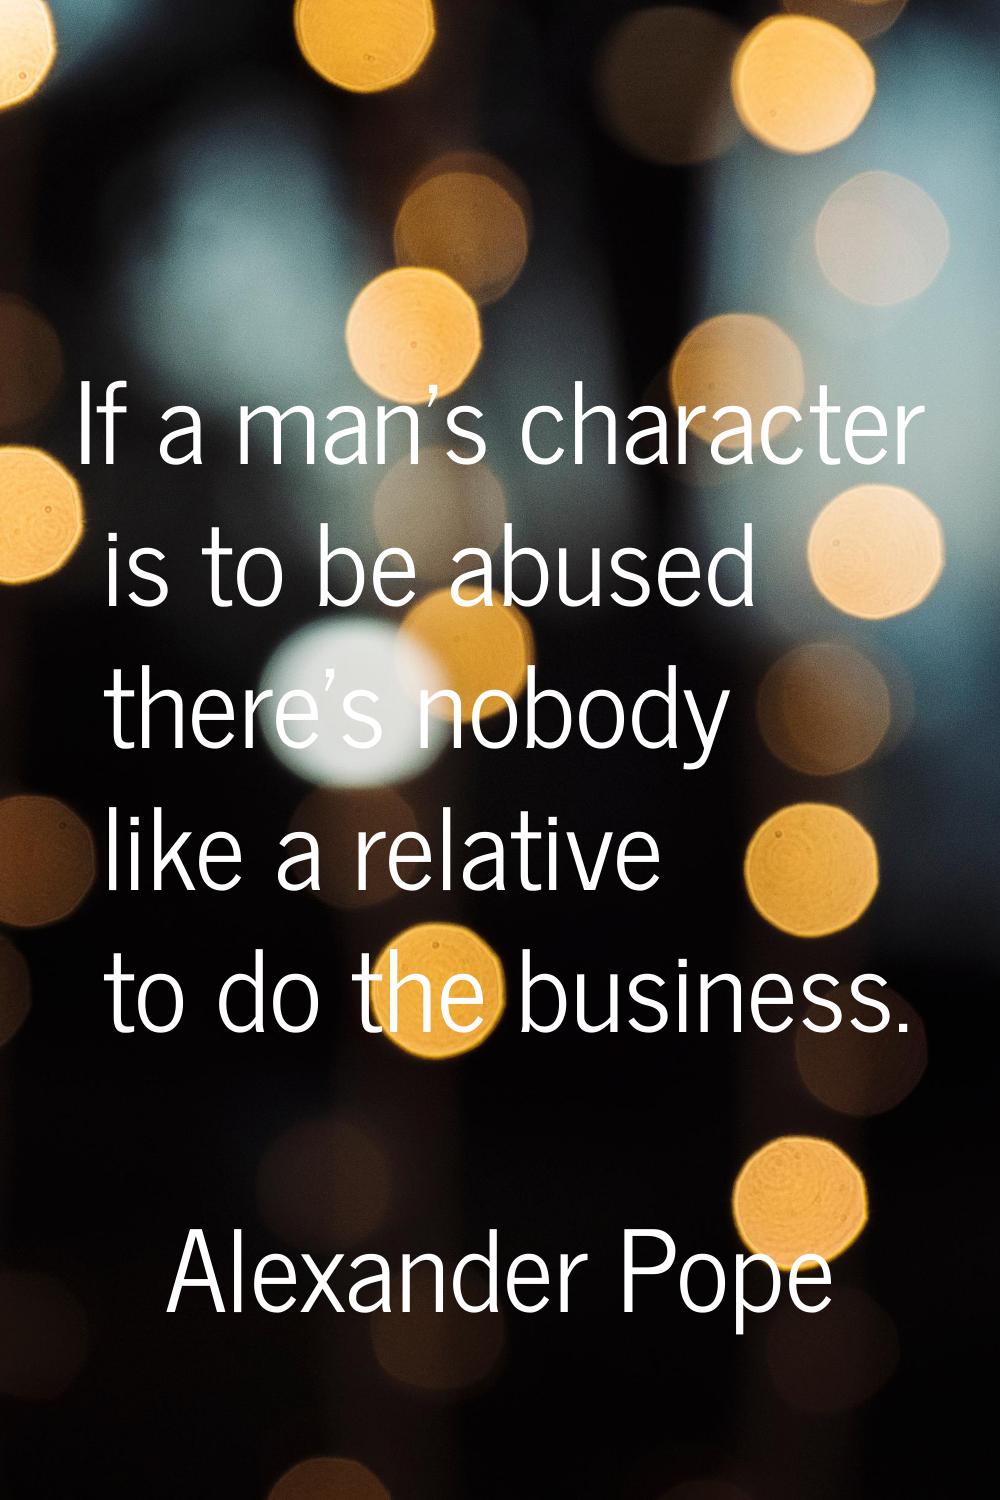 If a man's character is to be abused there's nobody like a relative to do the business.